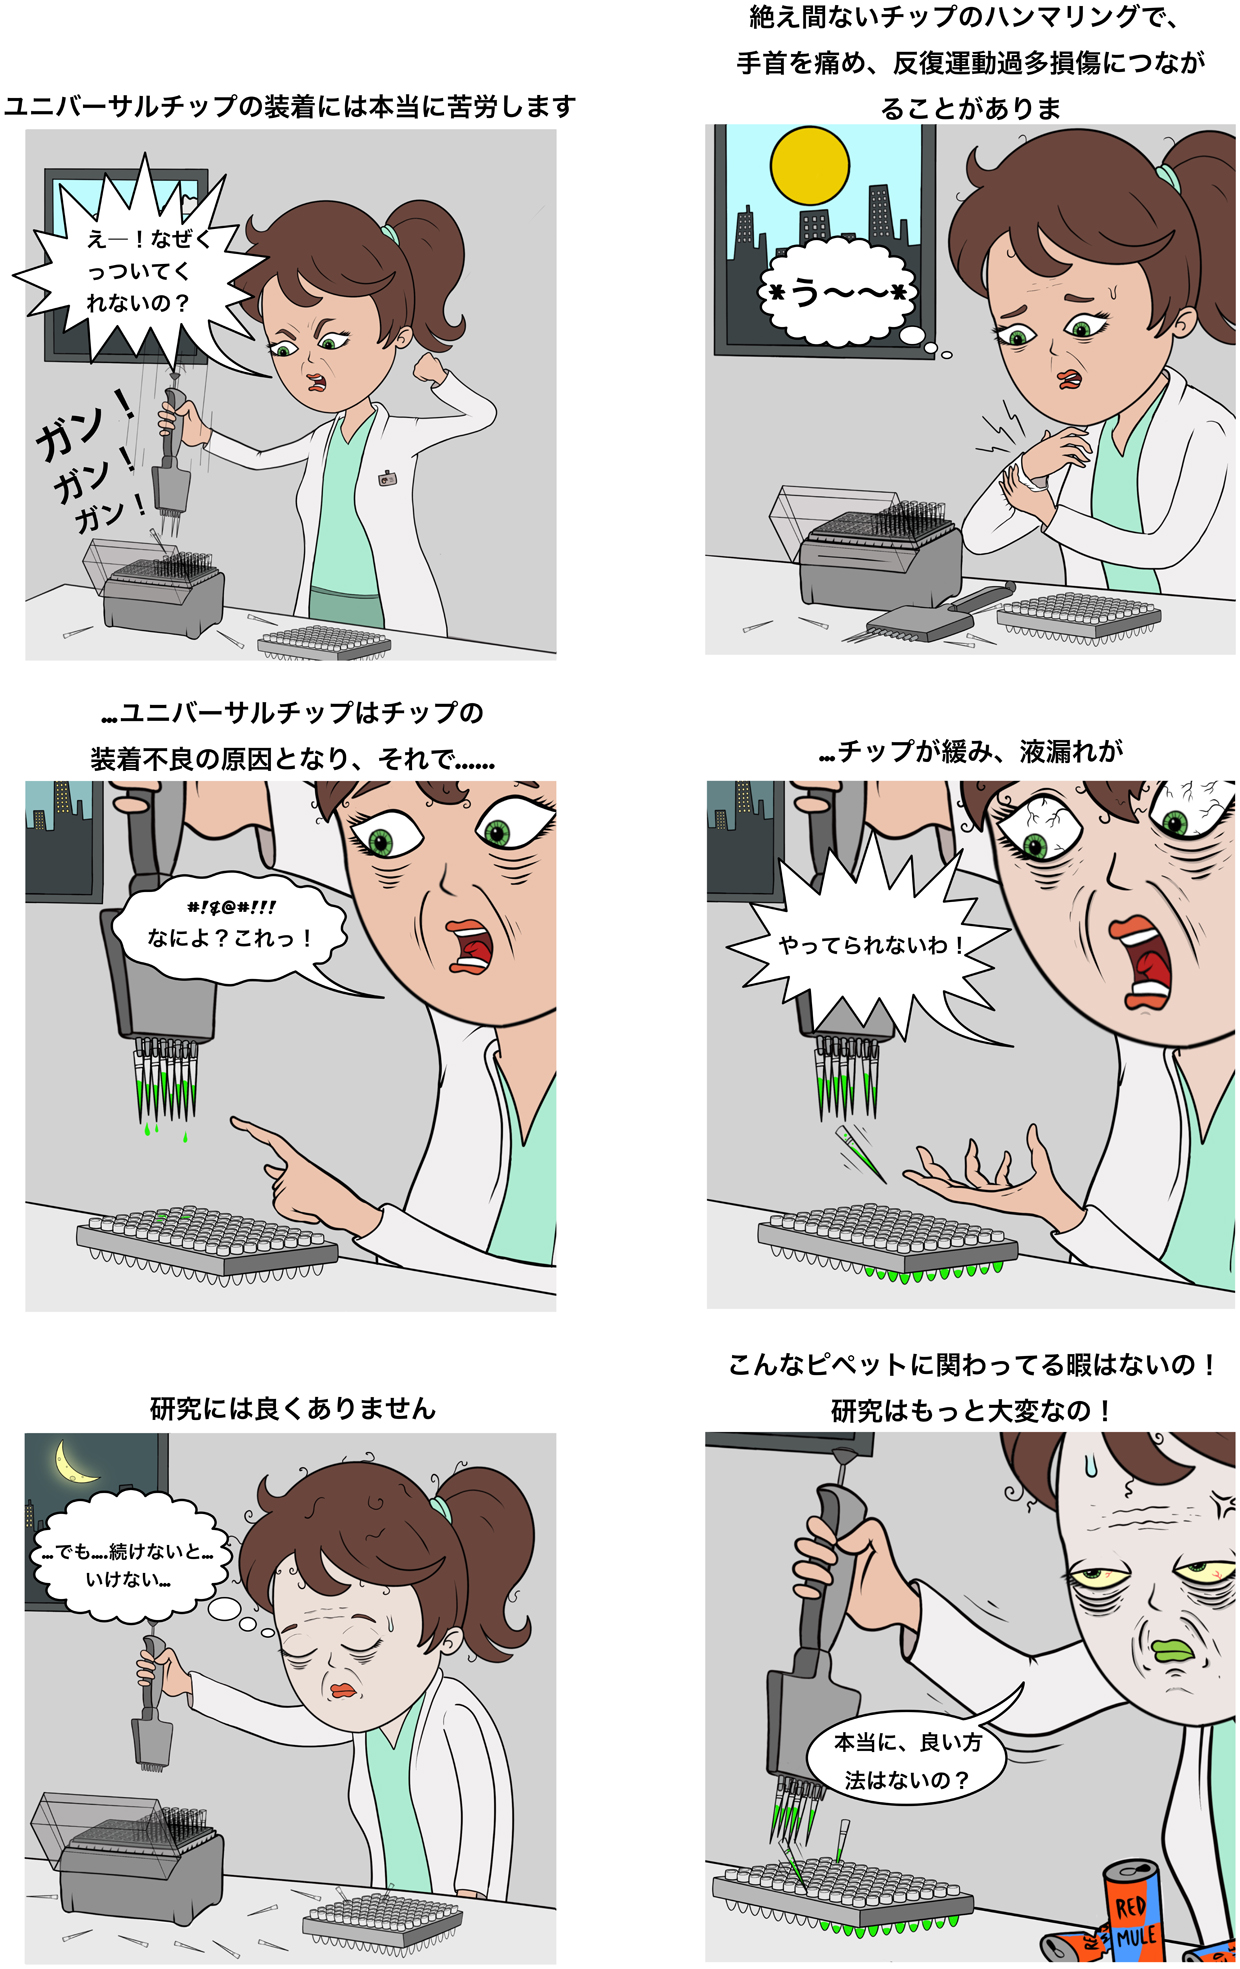 Cartoon of a scientist having problems with falling off universal pipette tips